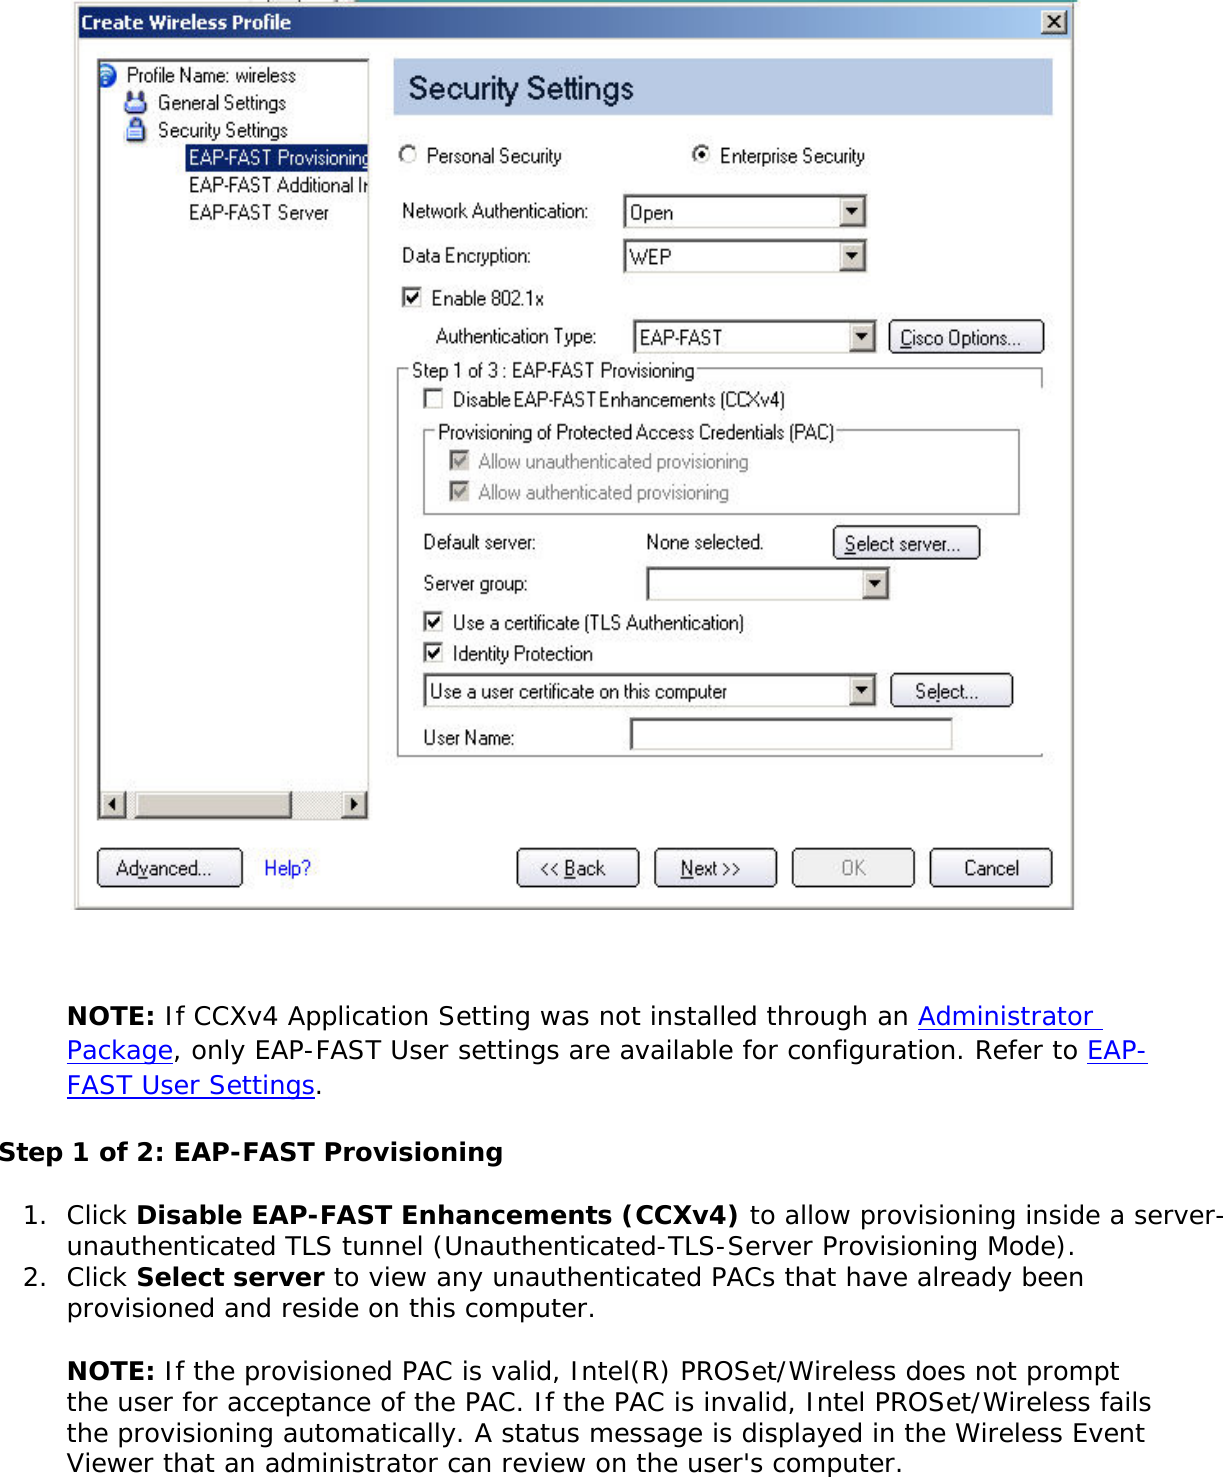 NOTE: If CCXv4 Application Setting was not installed through an Administrator Package, only EAP-FAST User settings are available for configuration. Refer to EAP-FAST User Settings. Step 1 of 2: EAP-FAST Provisioning 1.  Click Disable EAP-FAST Enhancements (CCXv4) to allow provisioning inside a server-unauthenticated TLS tunnel (Unauthenticated-TLS-Server Provisioning Mode).2.  Click Select server to view any unauthenticated PACs that have already been provisioned and reside on this computer.NOTE: If the provisioned PAC is valid, Intel(R) PROSet/Wireless does not prompt the user for acceptance of the PAC. If the PAC is invalid, Intel PROSet/Wireless fails the provisioning automatically. A status message is displayed in the Wireless Event Viewer that an administrator can review on the user&apos;s computer. 